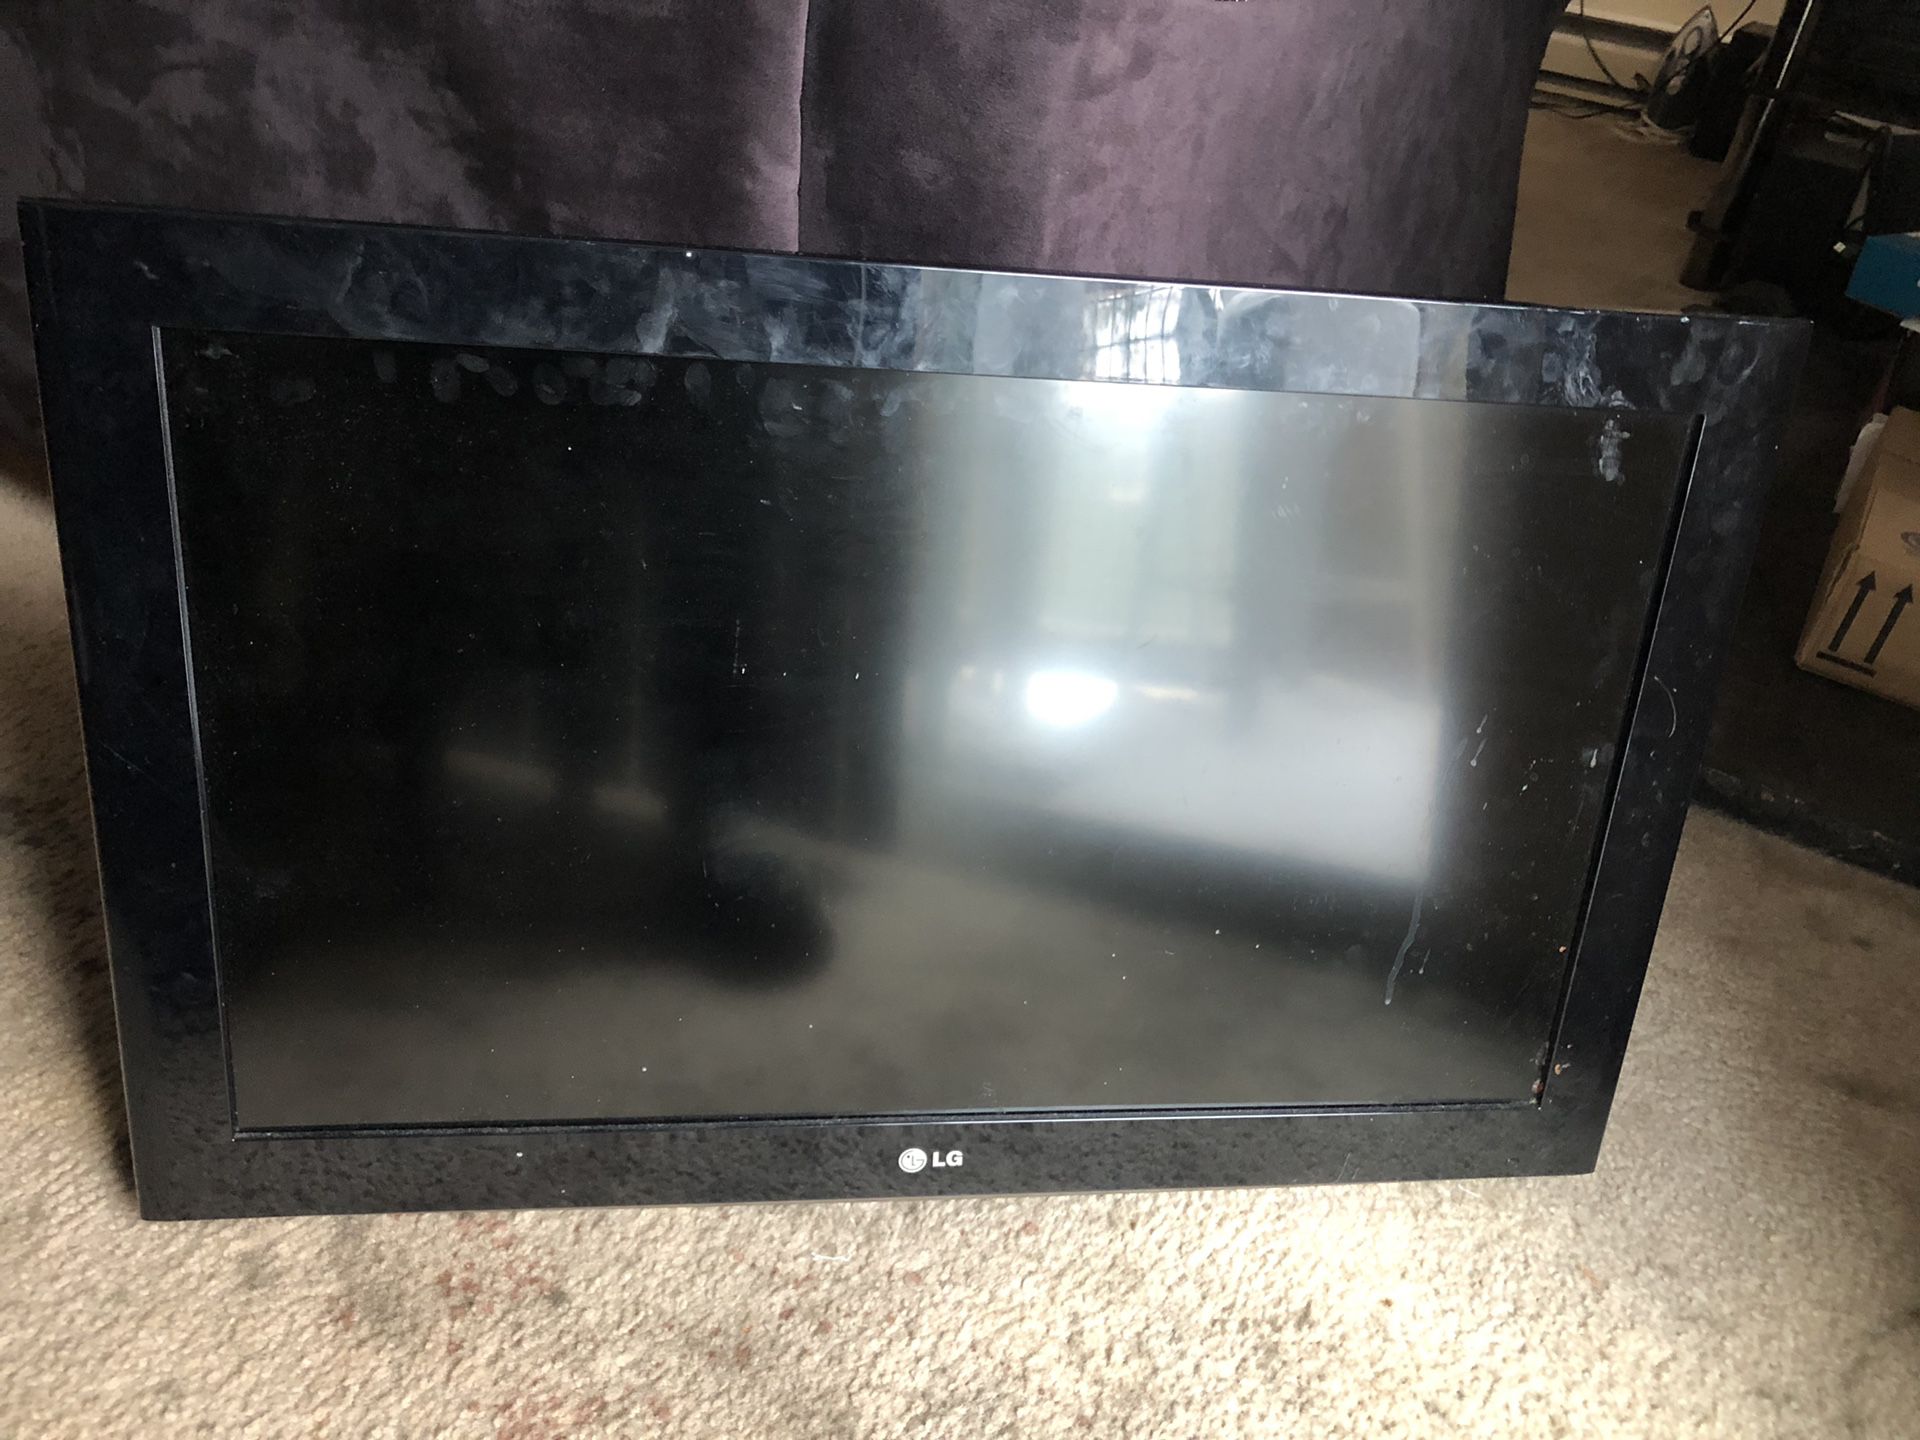 LG SMART TV 32 inches